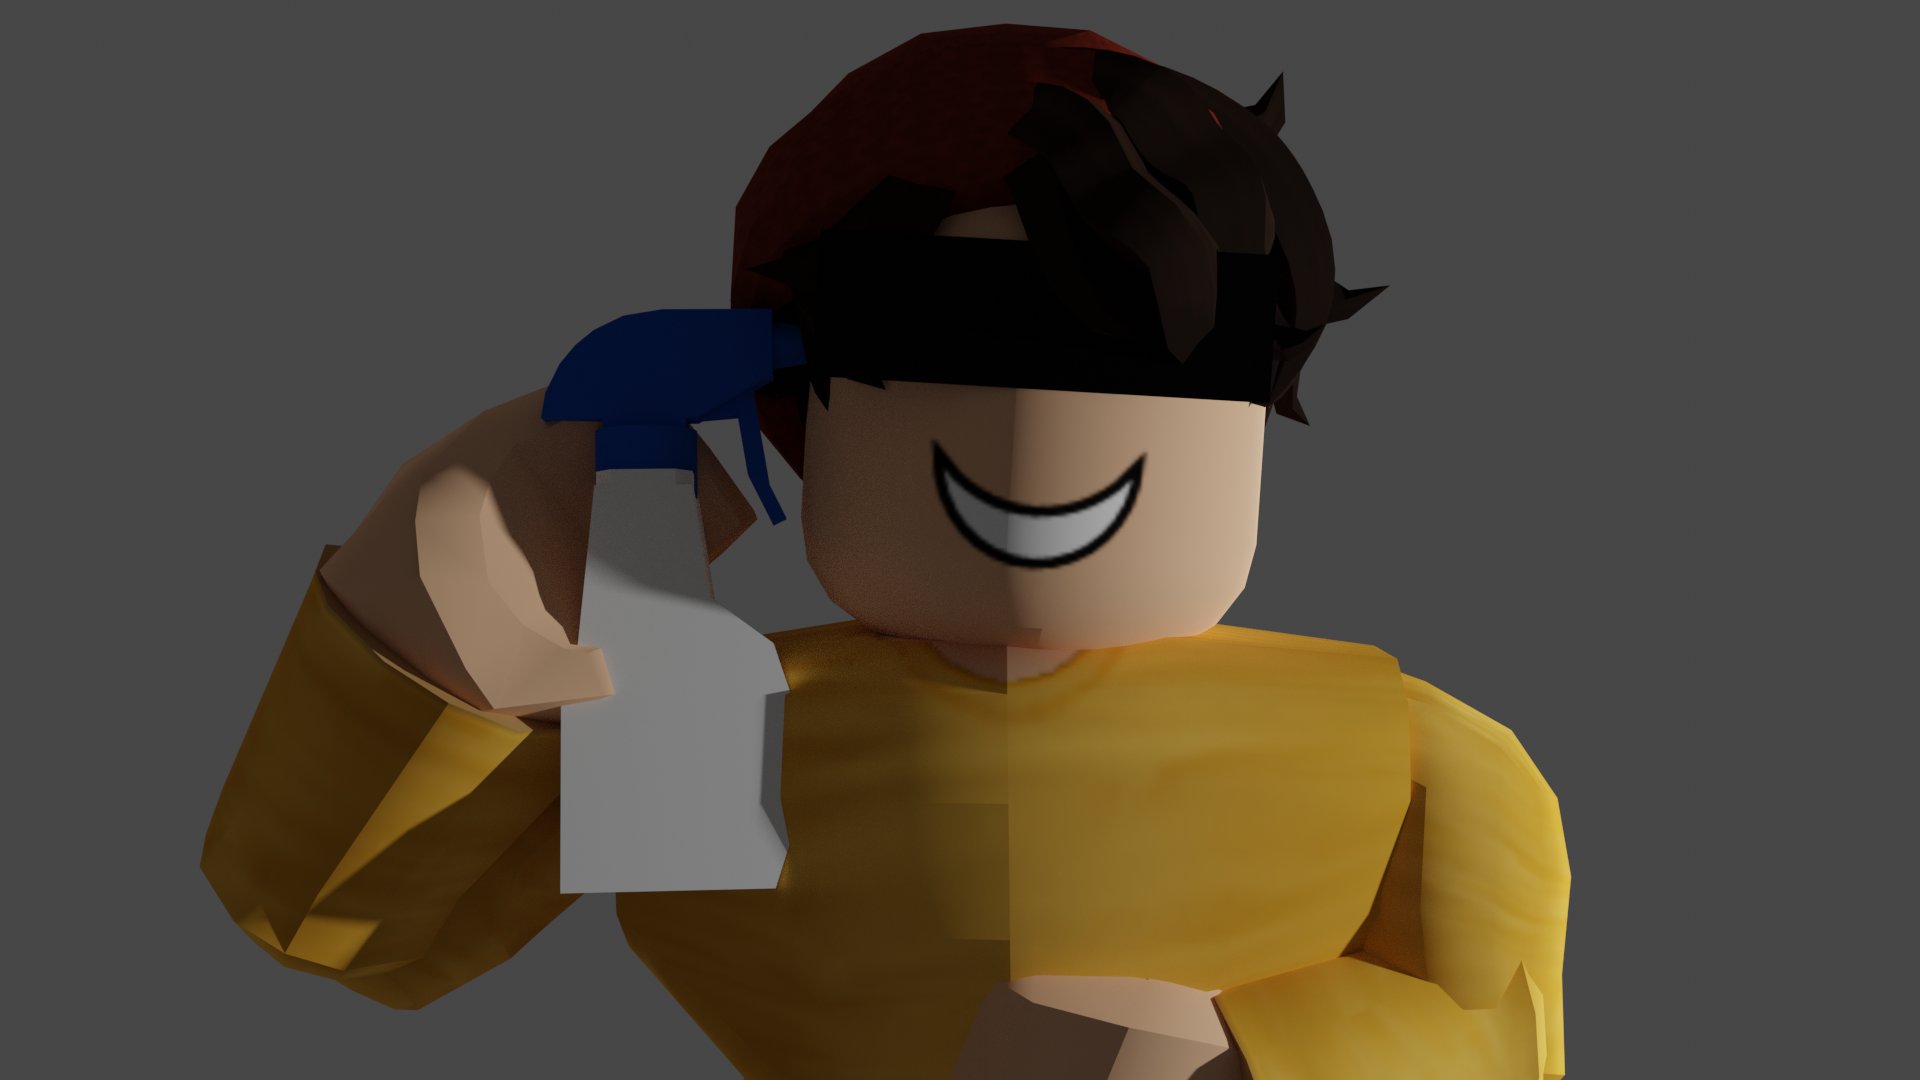 Random Mental Health Matters On Twitter Here Have A Wilbursoot Gfx That Took So Fucking Long To Render But Turned Out Poggers In The End One Maybe Coming Soon With - wilbur soot song codes for roblox